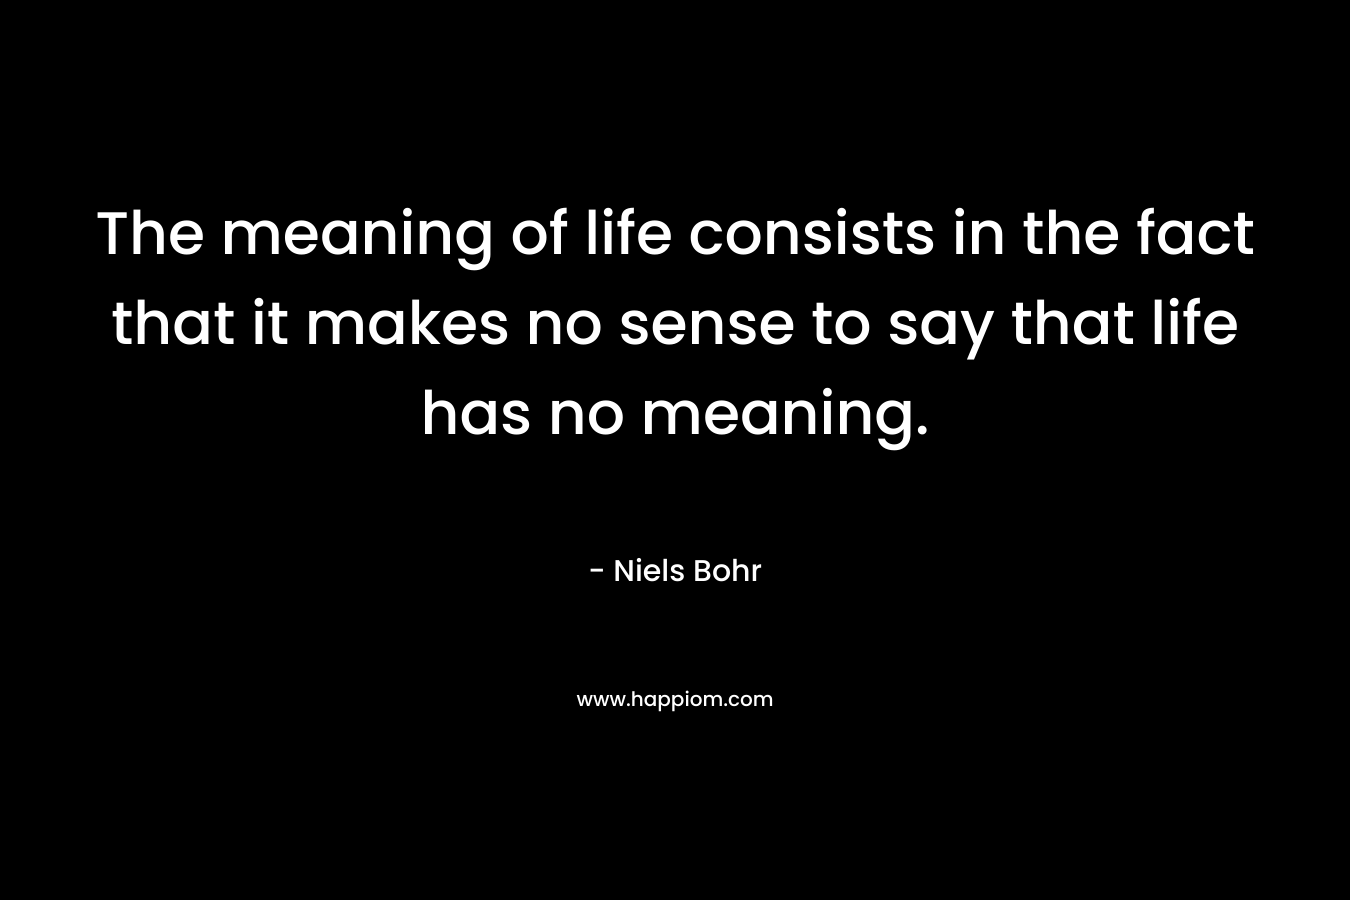 The meaning of life consists in the fact that it makes no sense to say that life has no meaning. – Niels Bohr